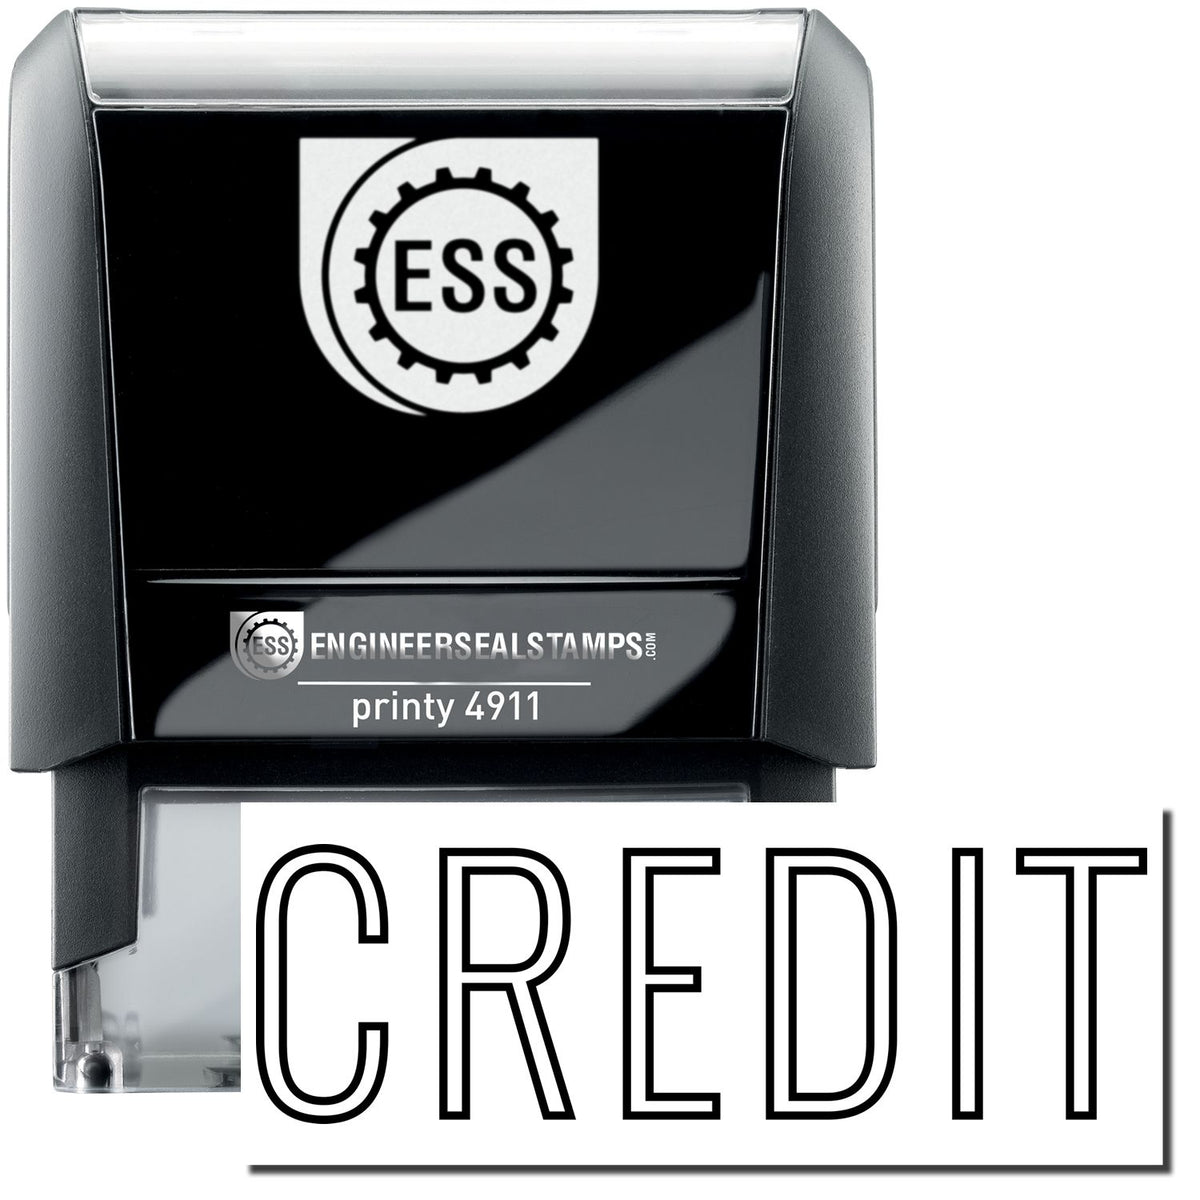 A self-inking stamp with a stamped image showing how the text &quot;CREDIT&quot; in an outline style is displayed after stamping.